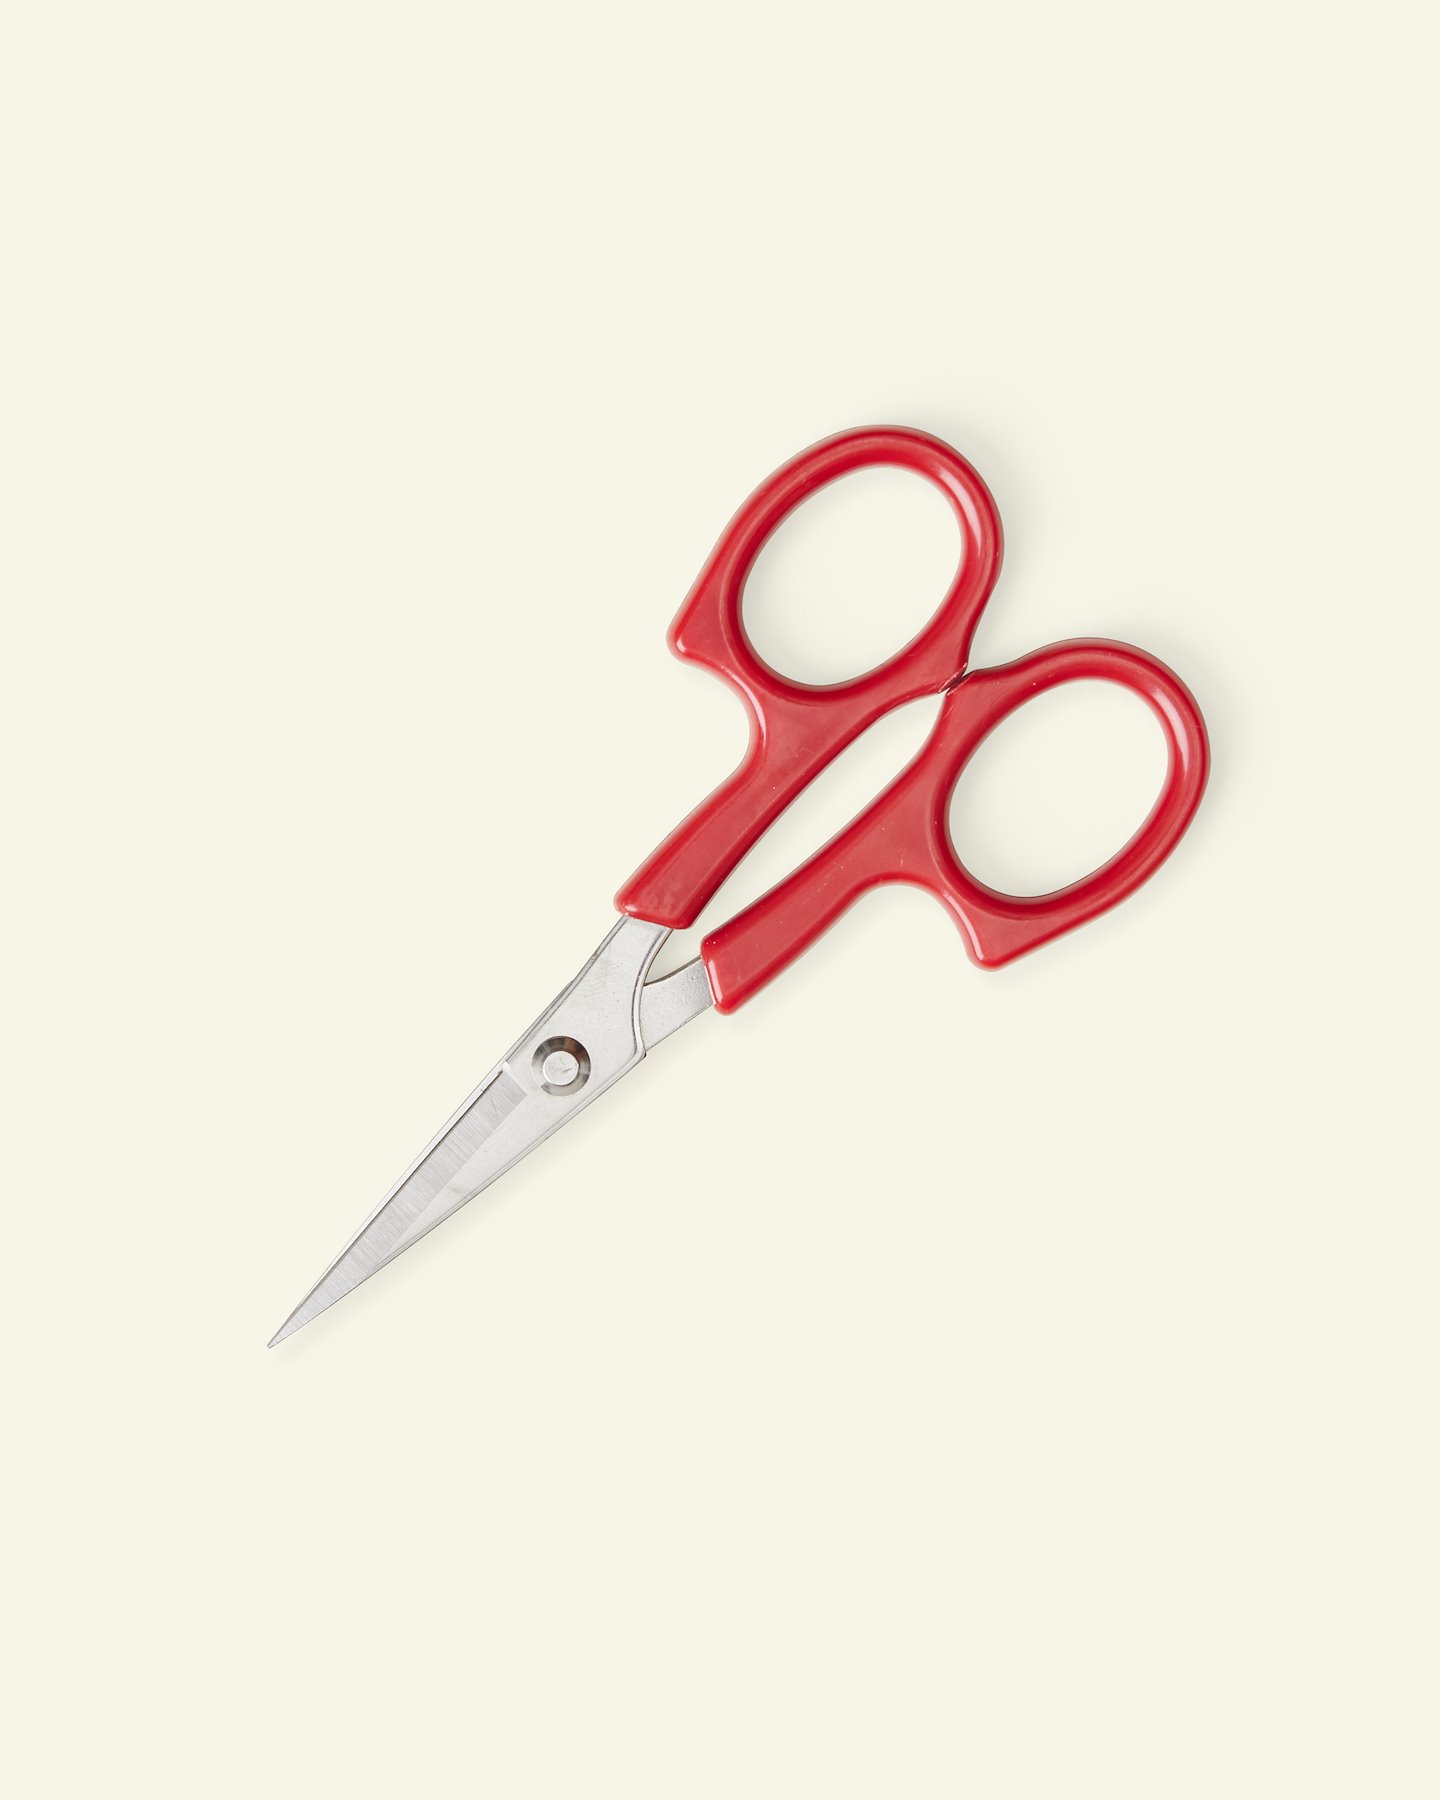 Sewing and Thread Scissors 7'' Made in Portugal 